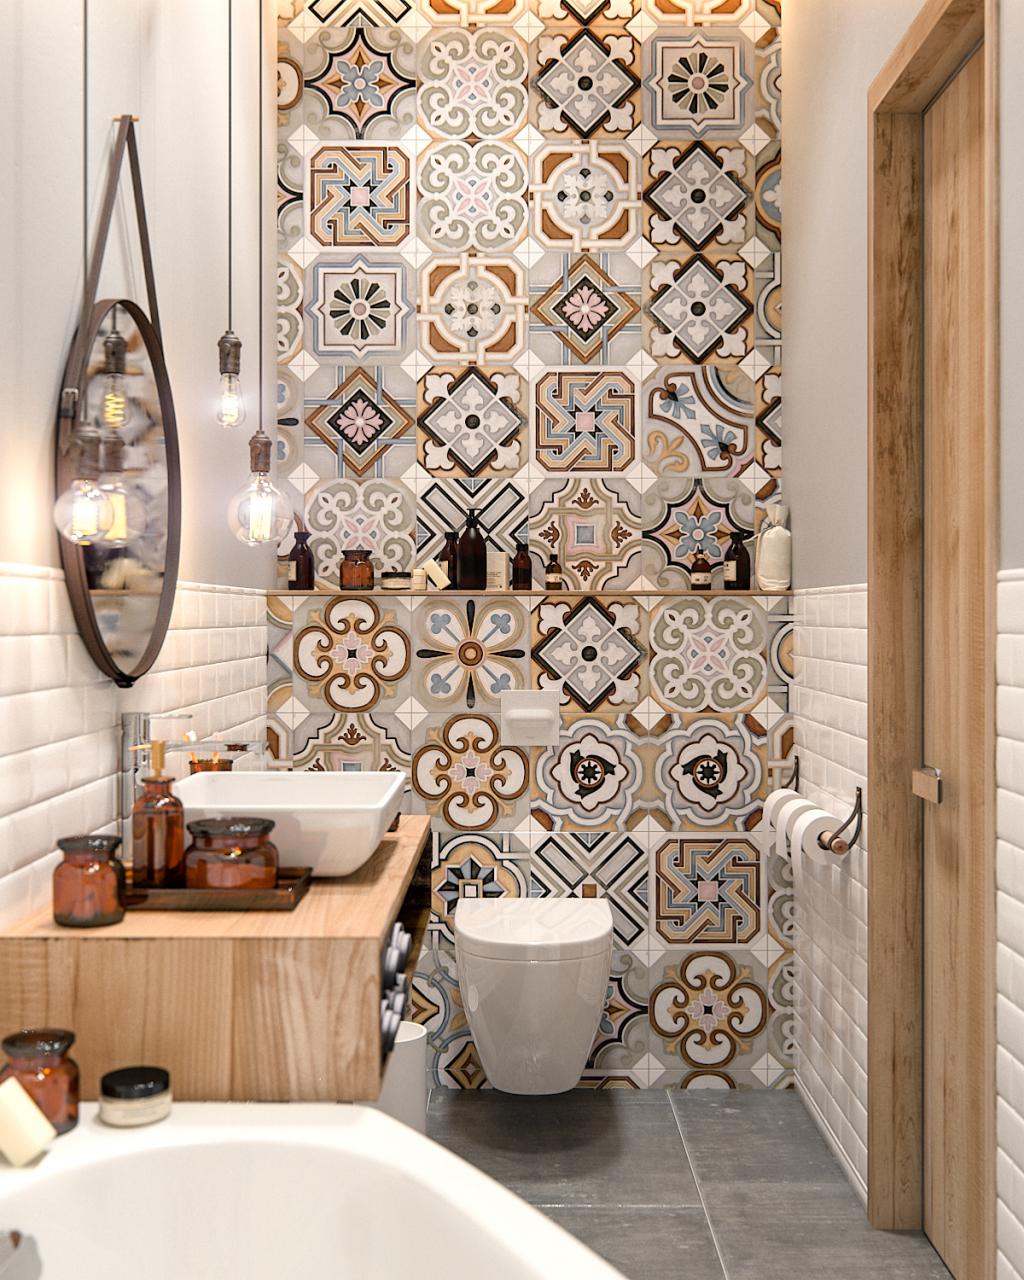 Colorful Bathroom Tiles are Coming back?